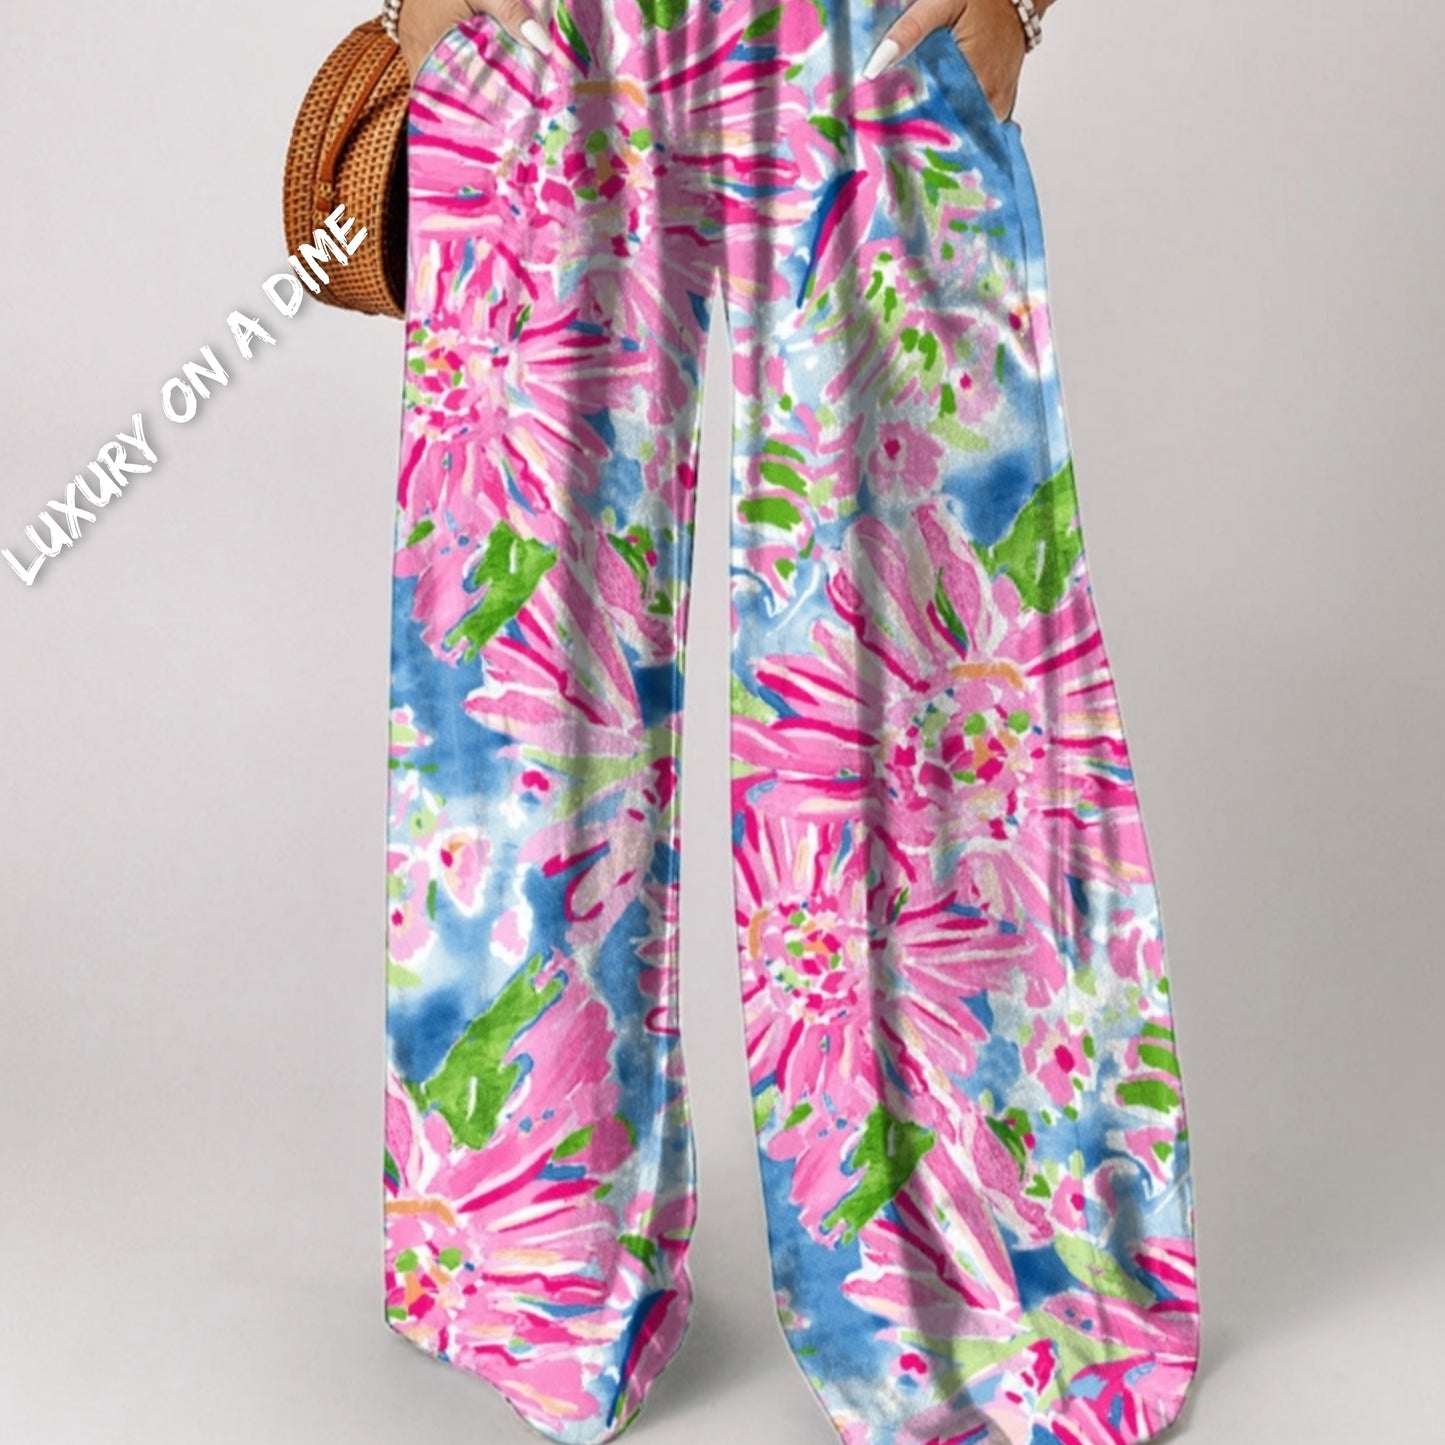 Palm Beach Floral Smock Sleeveless Wide Leg One Piece Pocket Pant Jumpsuit